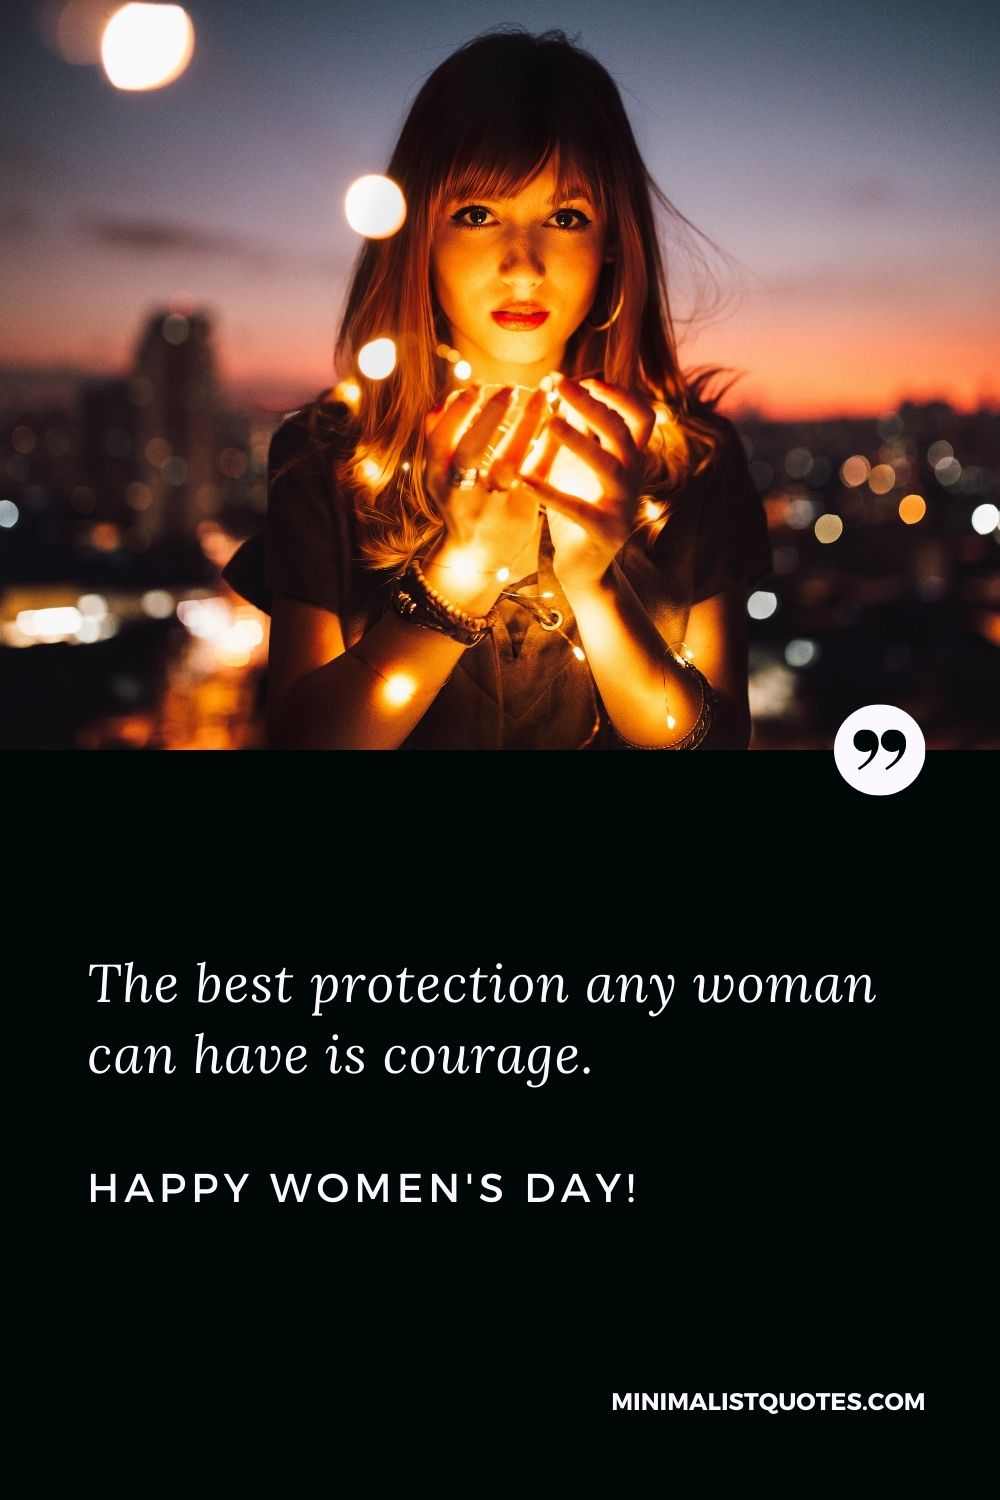 Happy women's day caption: The best protection any woman can have is courage. Happy Womens Day!